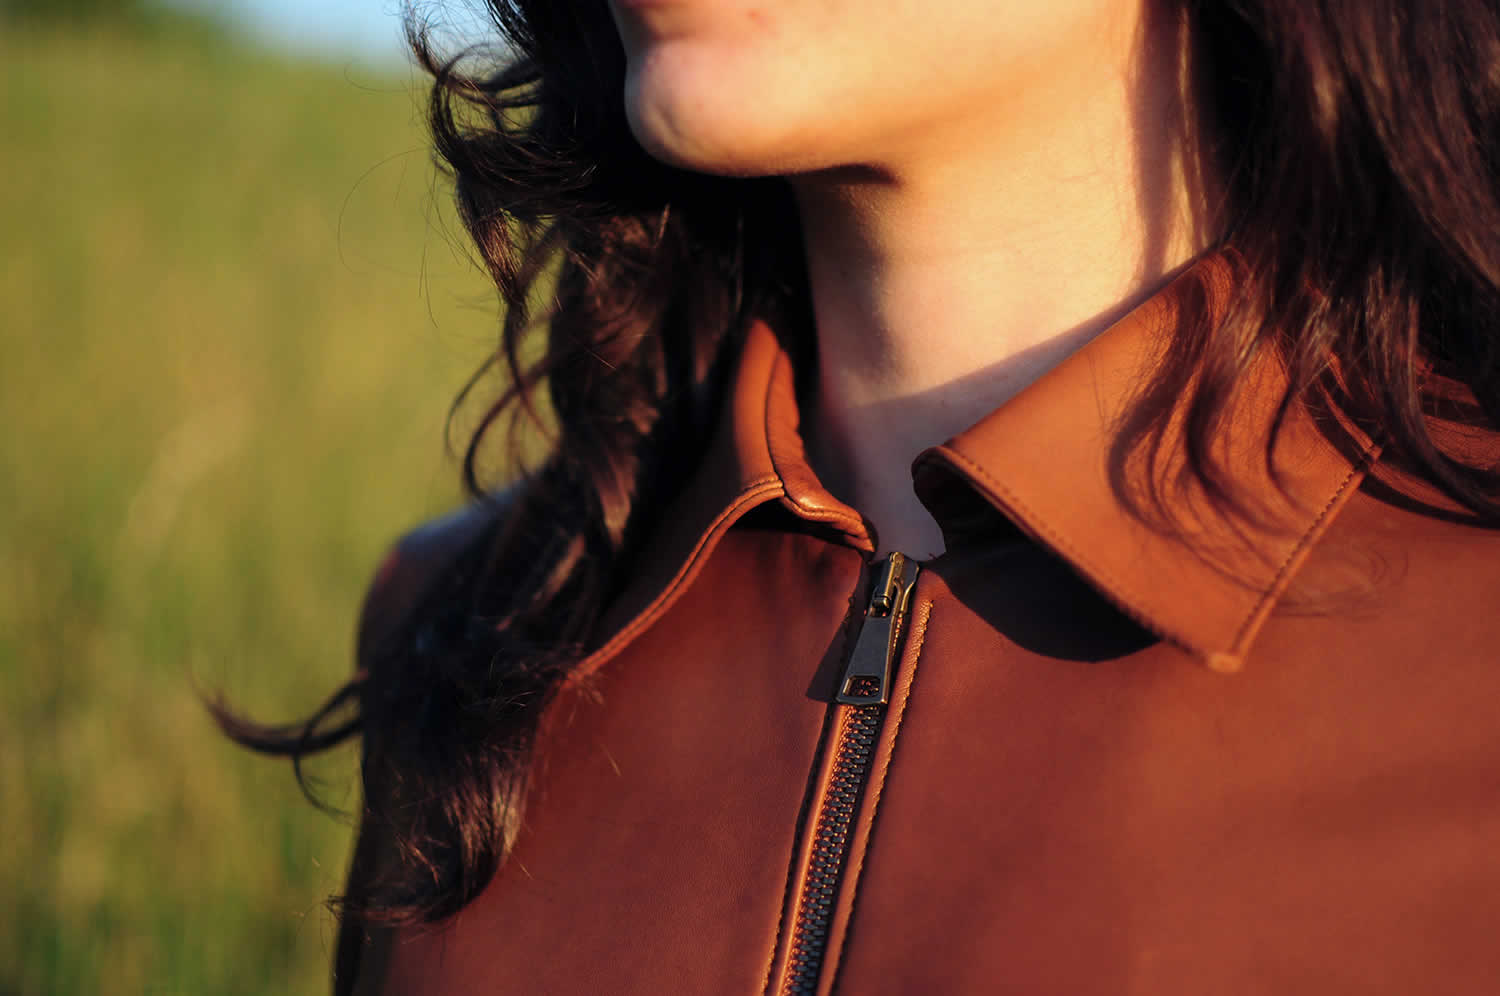 ladulsatina Sewing and DIY fashion blog: leather jacket and playsuit - collar detail